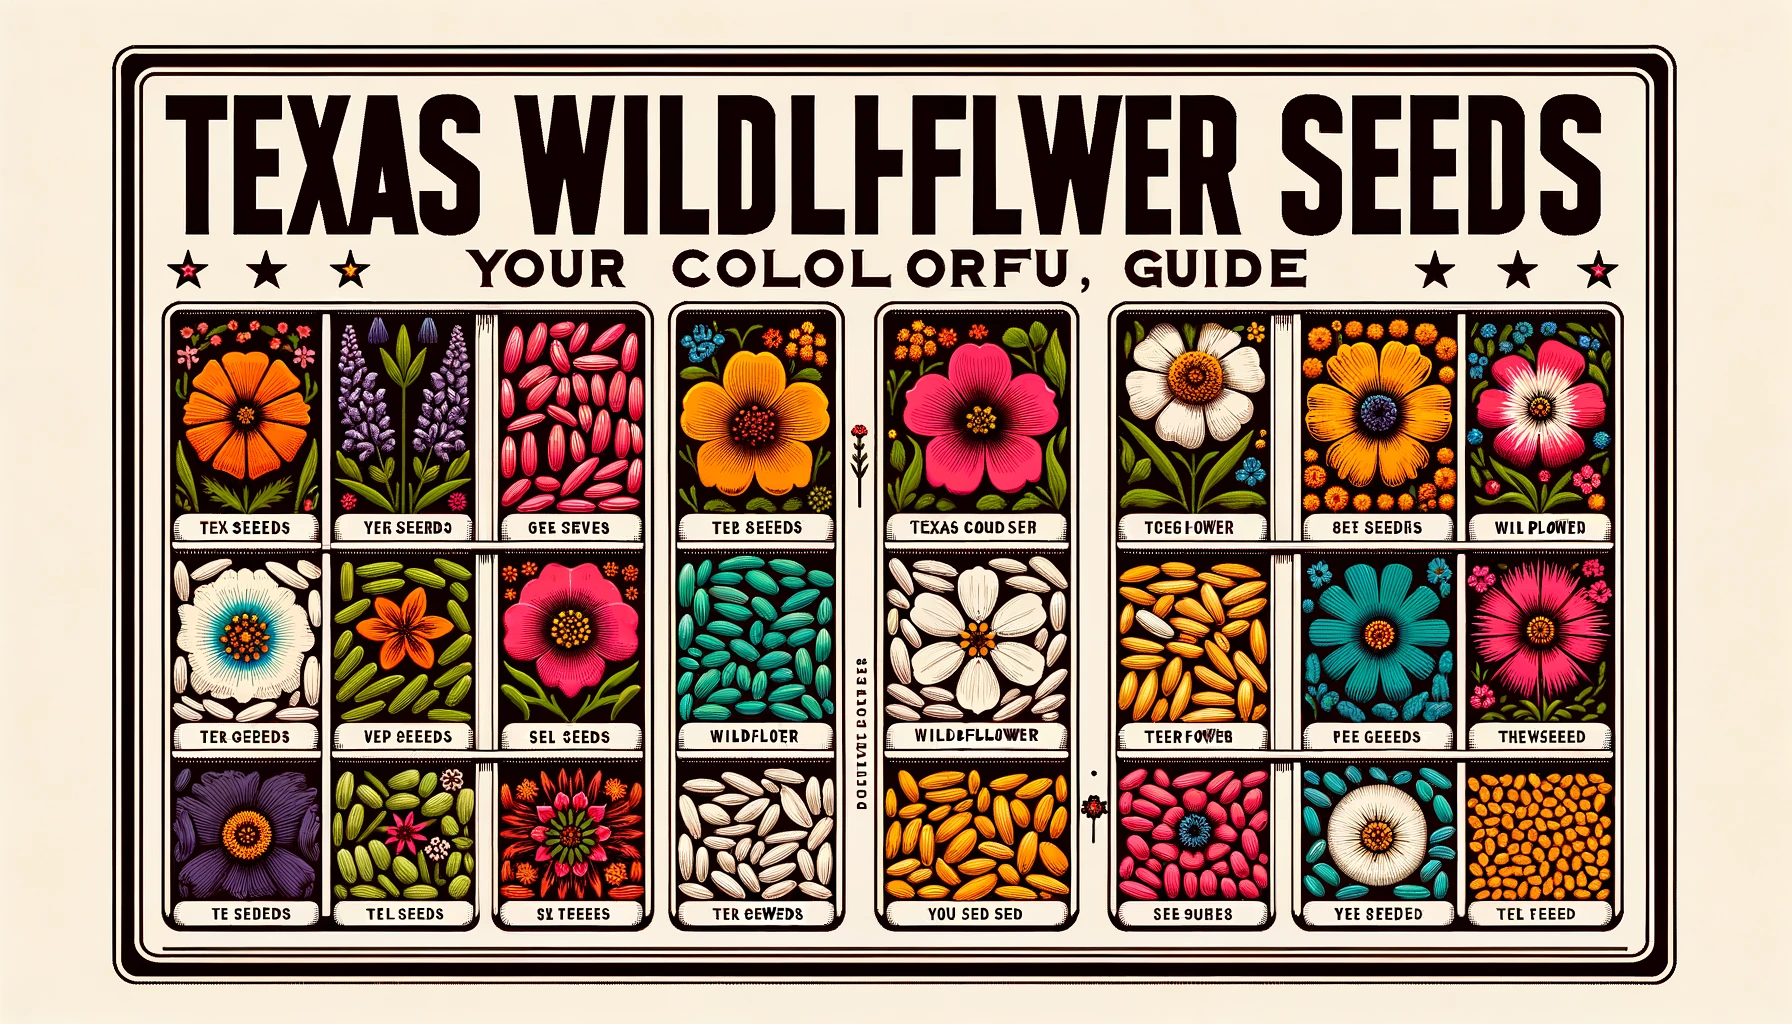 Texas Wildflower Seeds: A Colorful Guide to Texas Wildflowers